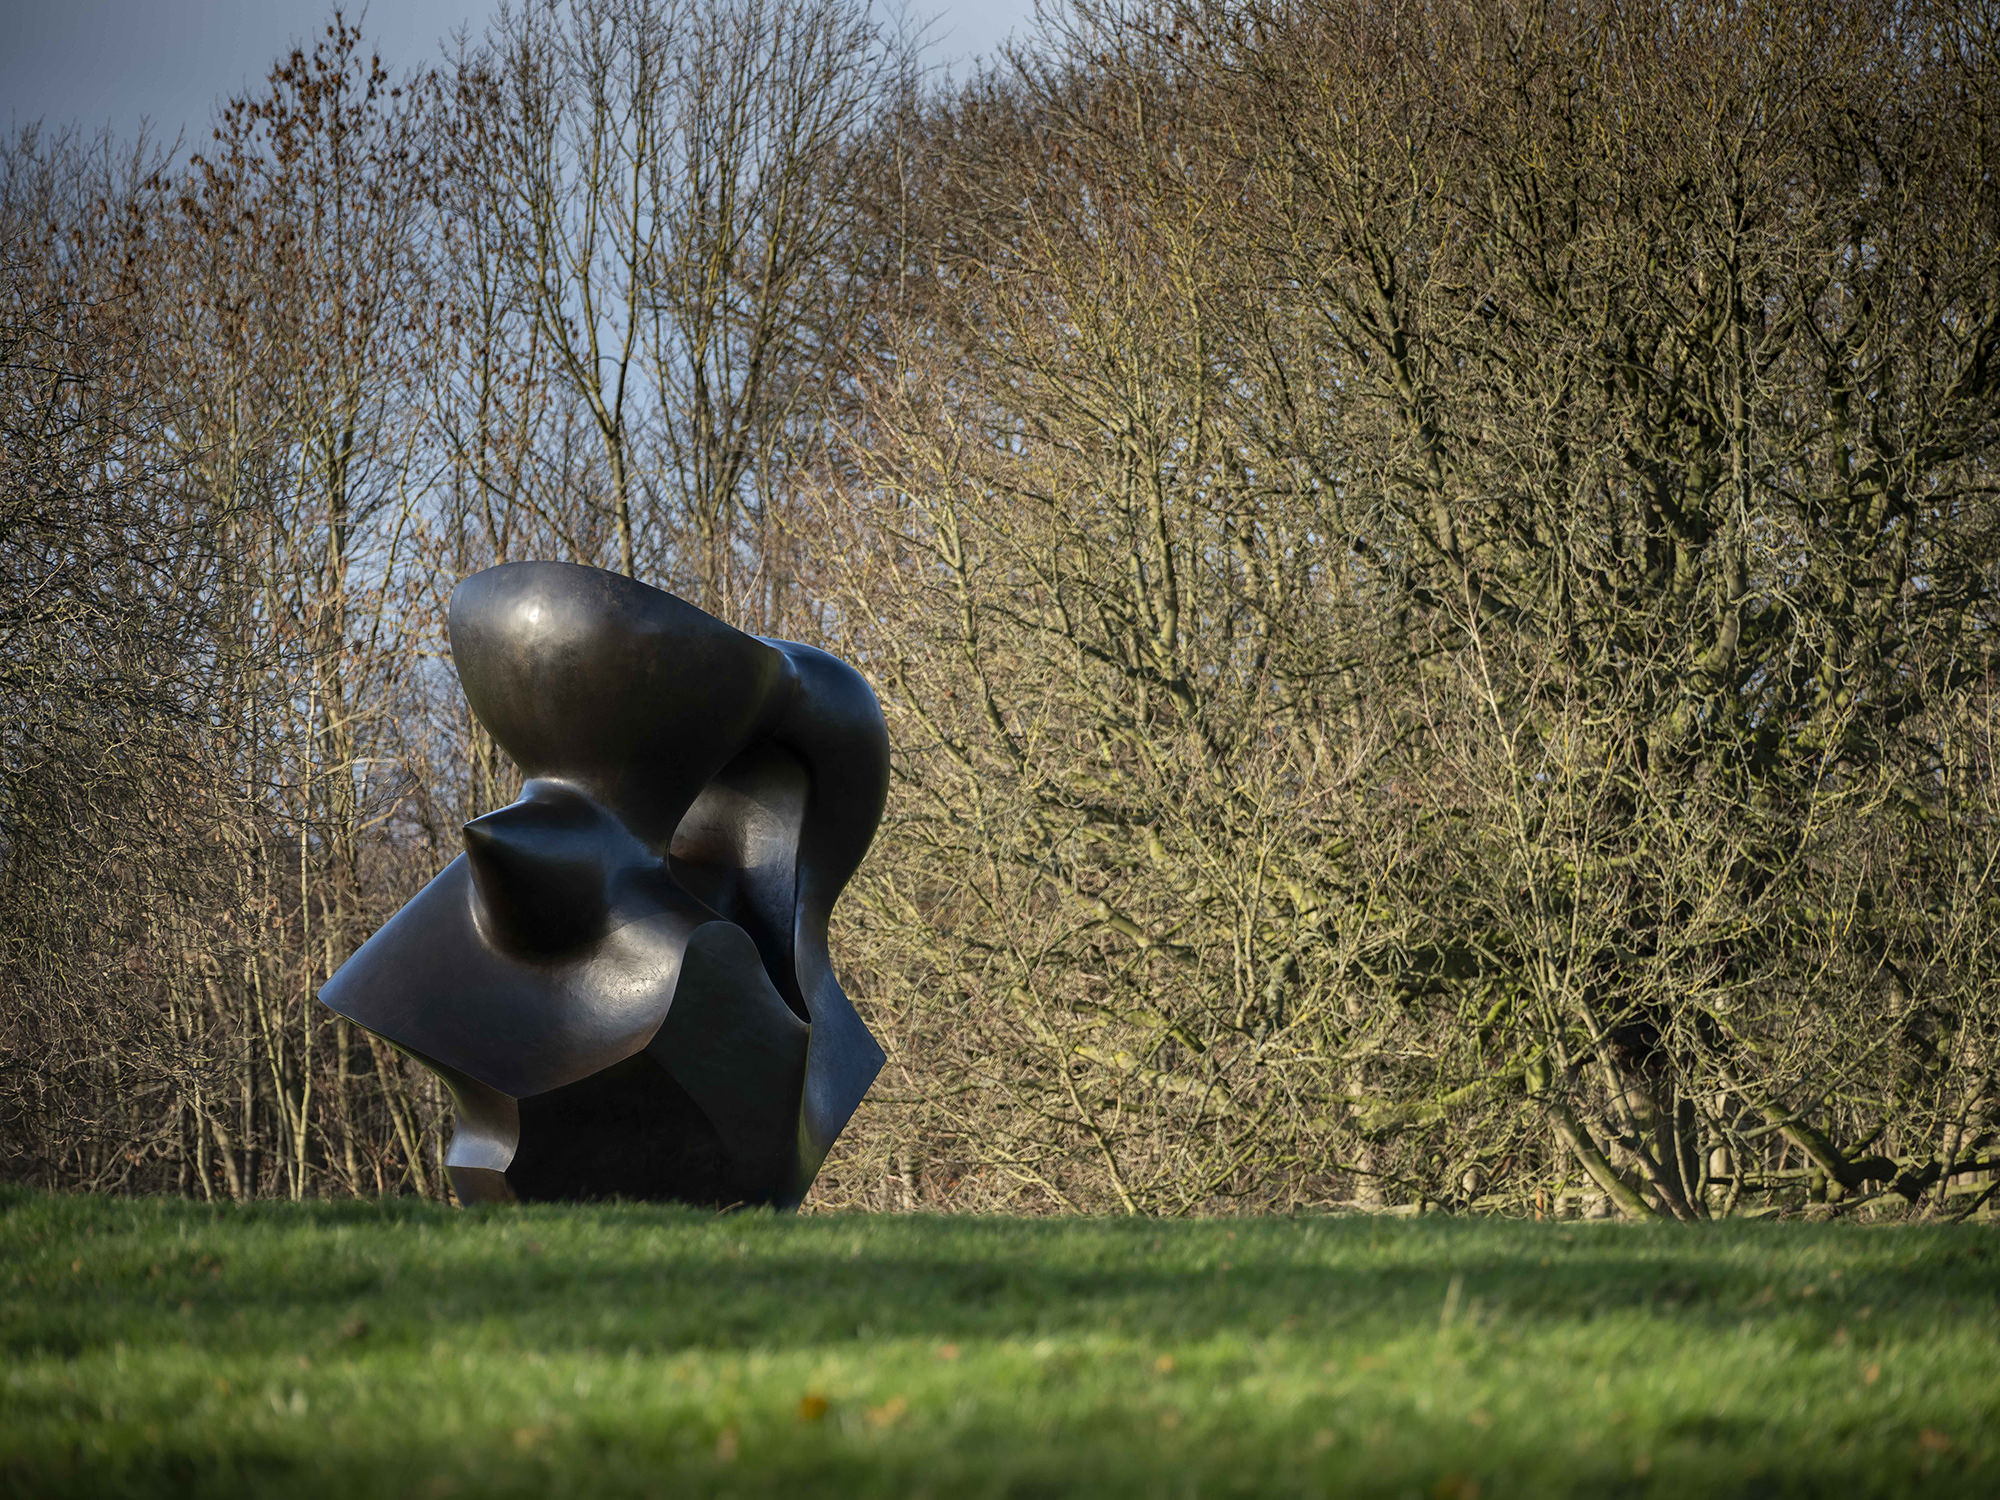 Henry Moore – Large Spindle Piece at Yorkshire Sculpture Park